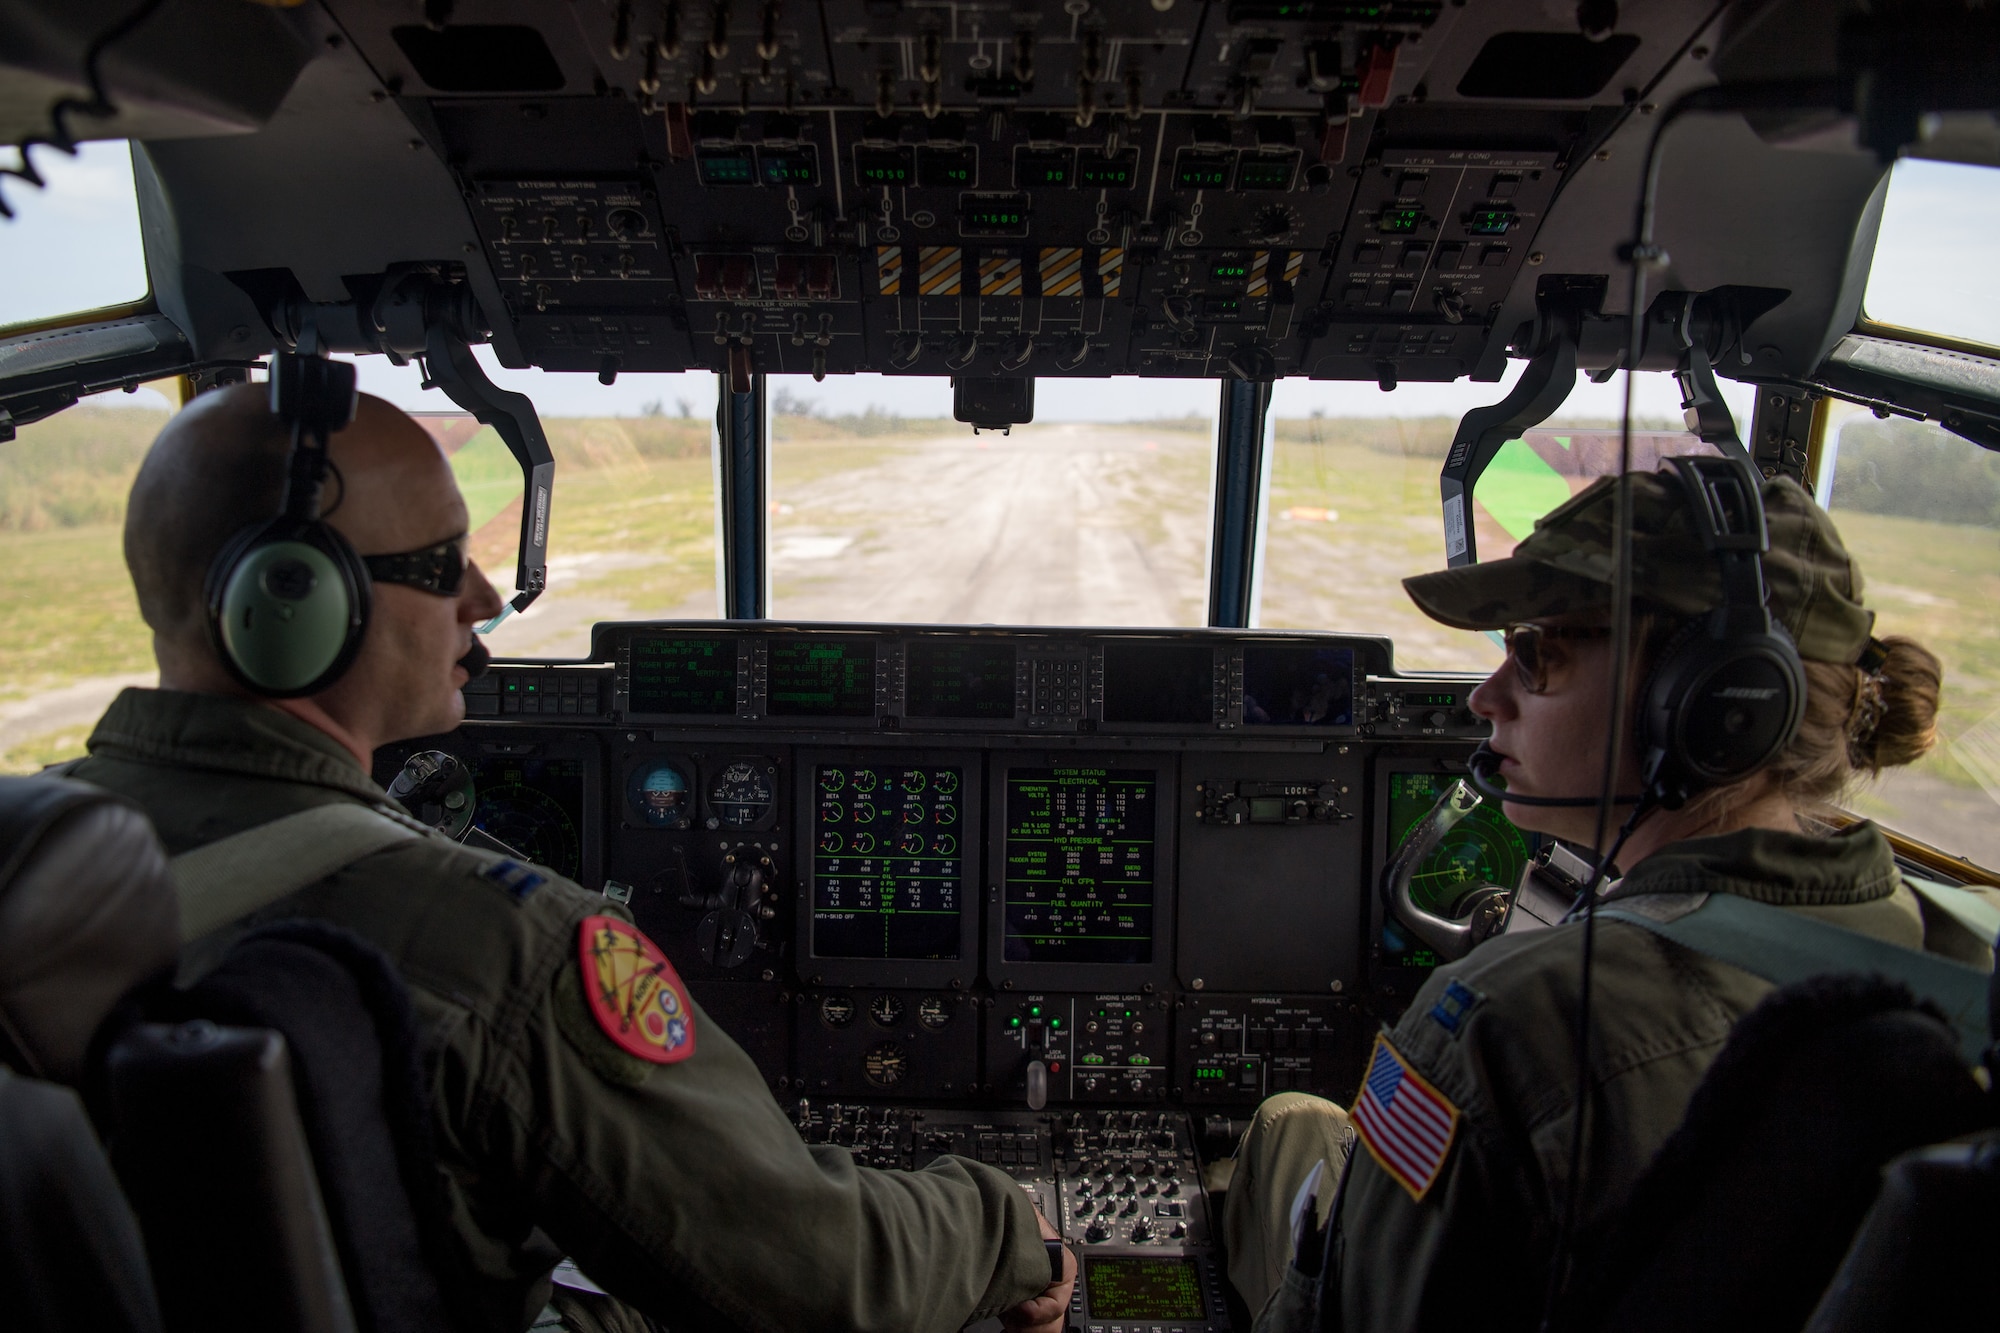 Capt. Jason Rimmer and Capt. Leesa Froelich, pilots assigned to the 815th Airlift Squadron, Keesler Air Force Base, Mississippi, fly a C-130J Hercules for an airdrop of Royal Australian Air Force combat controllers assigned to the 4th Squadron, Bravo flight, during Exercise Cope North 20, Feb. 14, 2020, Andersen Air Force Base, Guam. Cope North 20 is an annual trilateral field training exercise conducted at Andersen Air Force Base, Guam, and around the Commonwealth of the Northern Mariana Islands (CNMI), Palau and Yap in the Federated States of Micronesia. (U.S. Air Force photo by Senior Airman Gracie Lee)